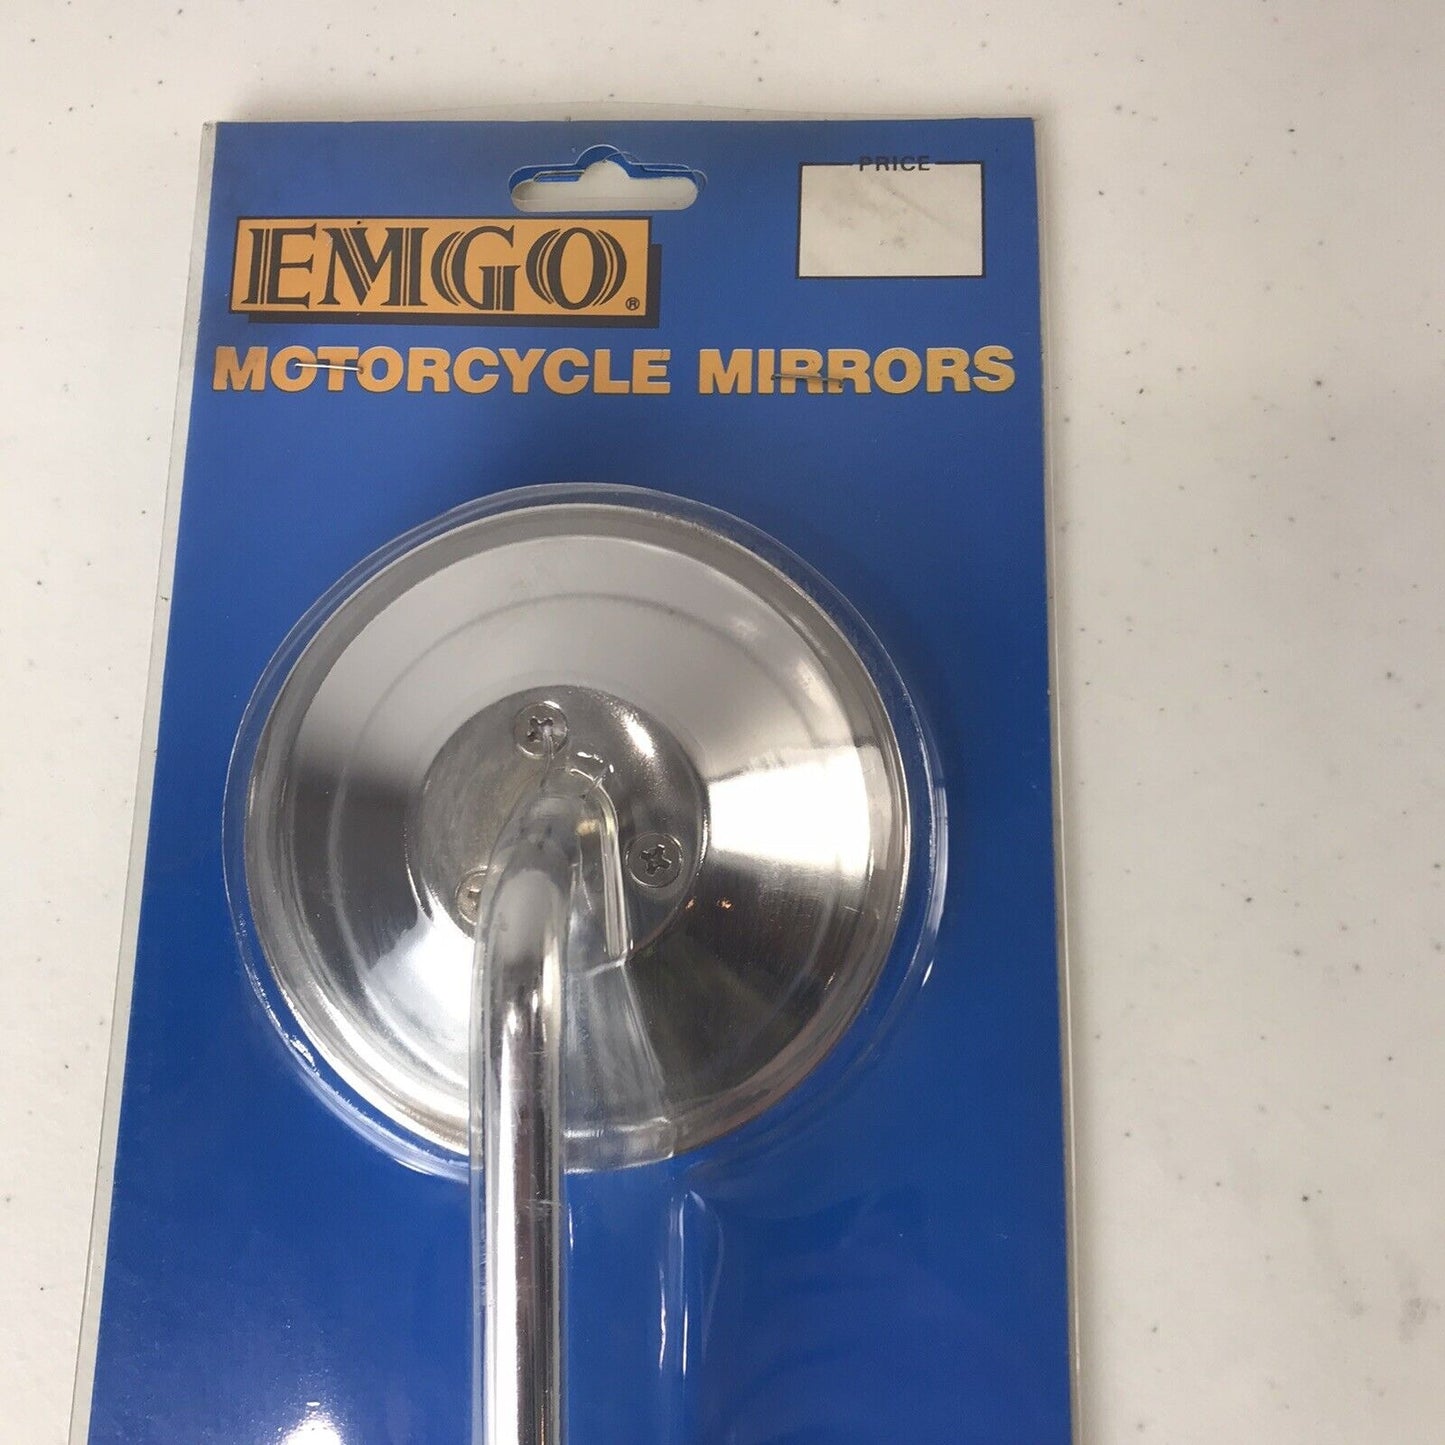 Emgo Motorcycle Mirror 8 Inch Stem w/ 3 Way Clamp-On Part No. 20-06808